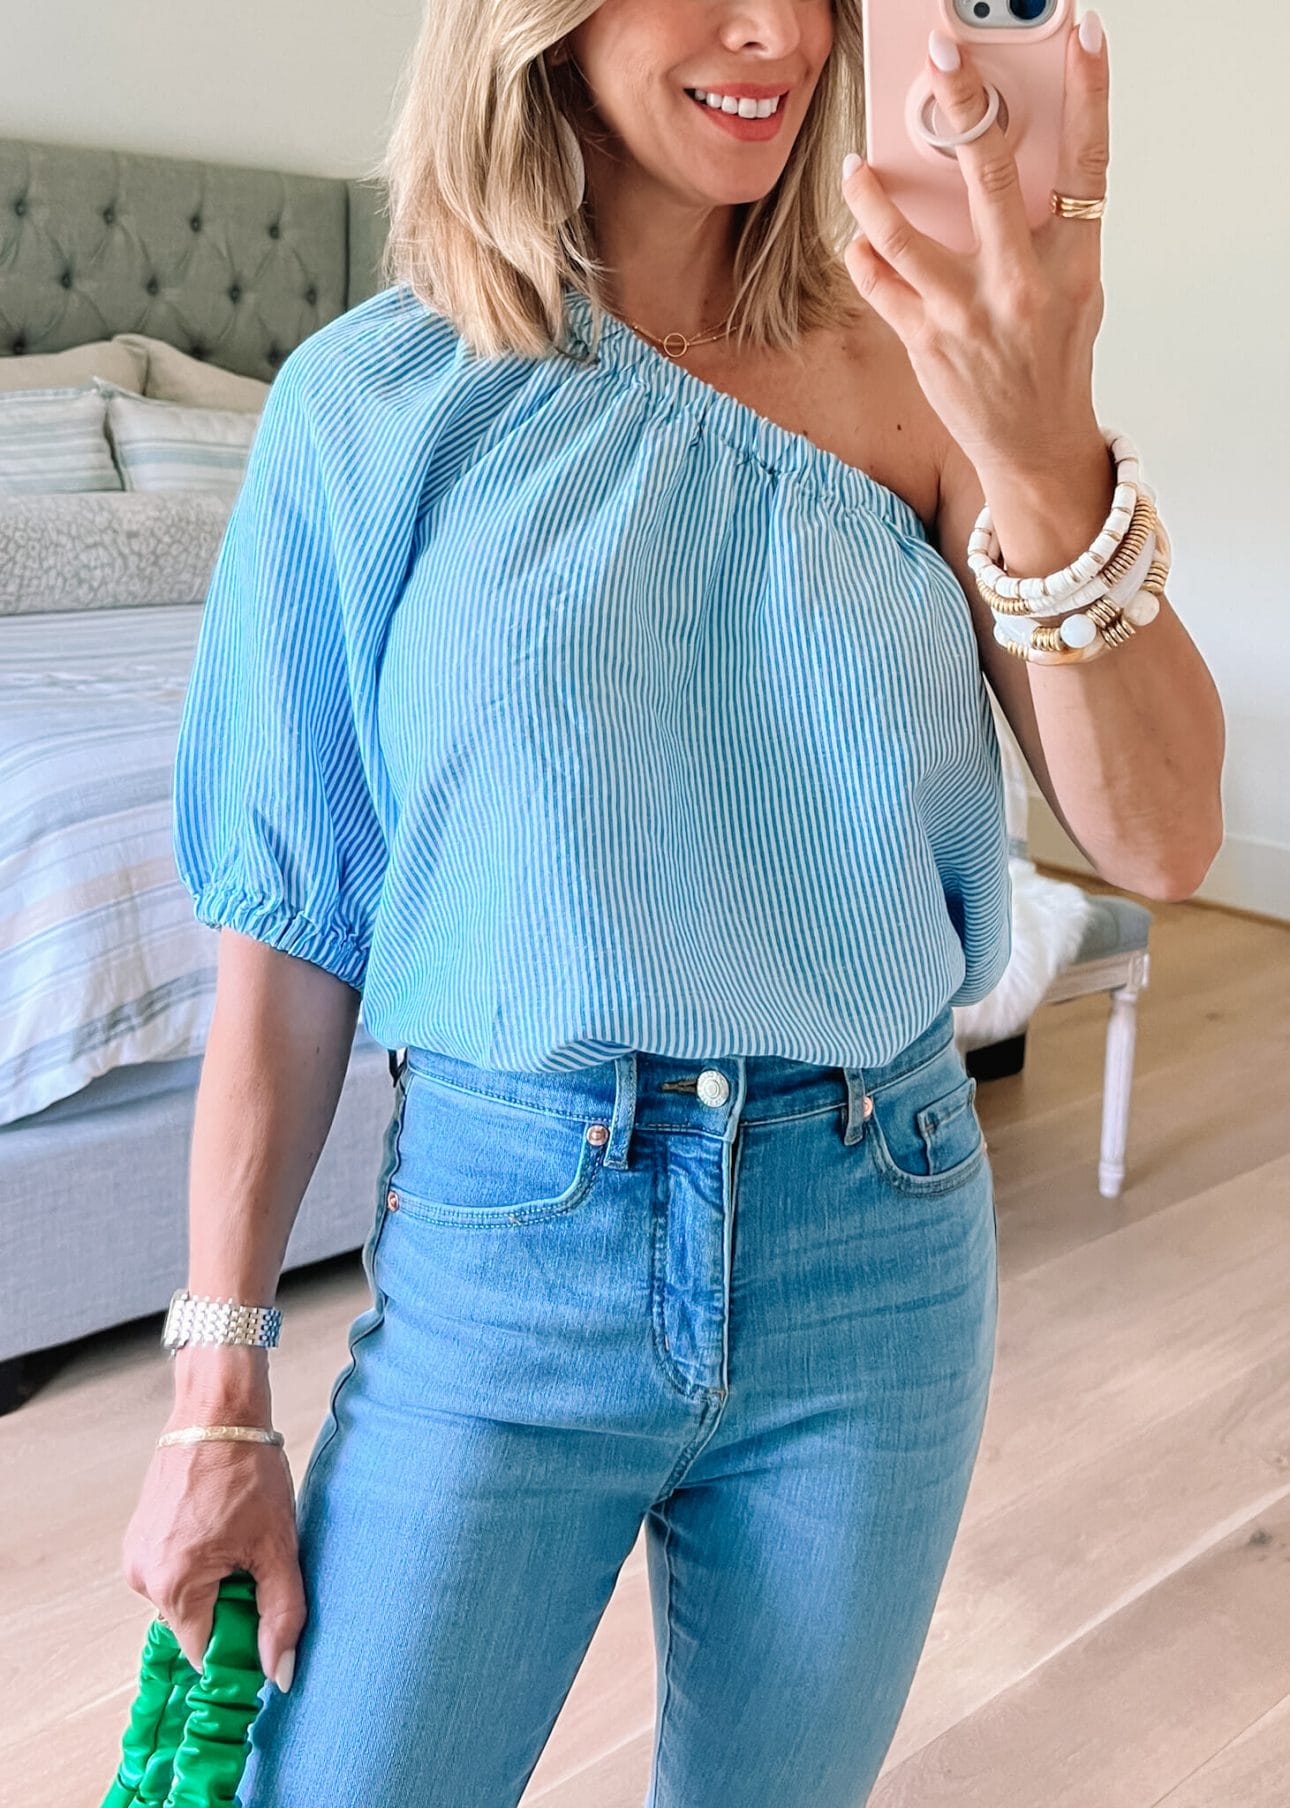 One Shoulder striped Top, Jeans, Green Purse